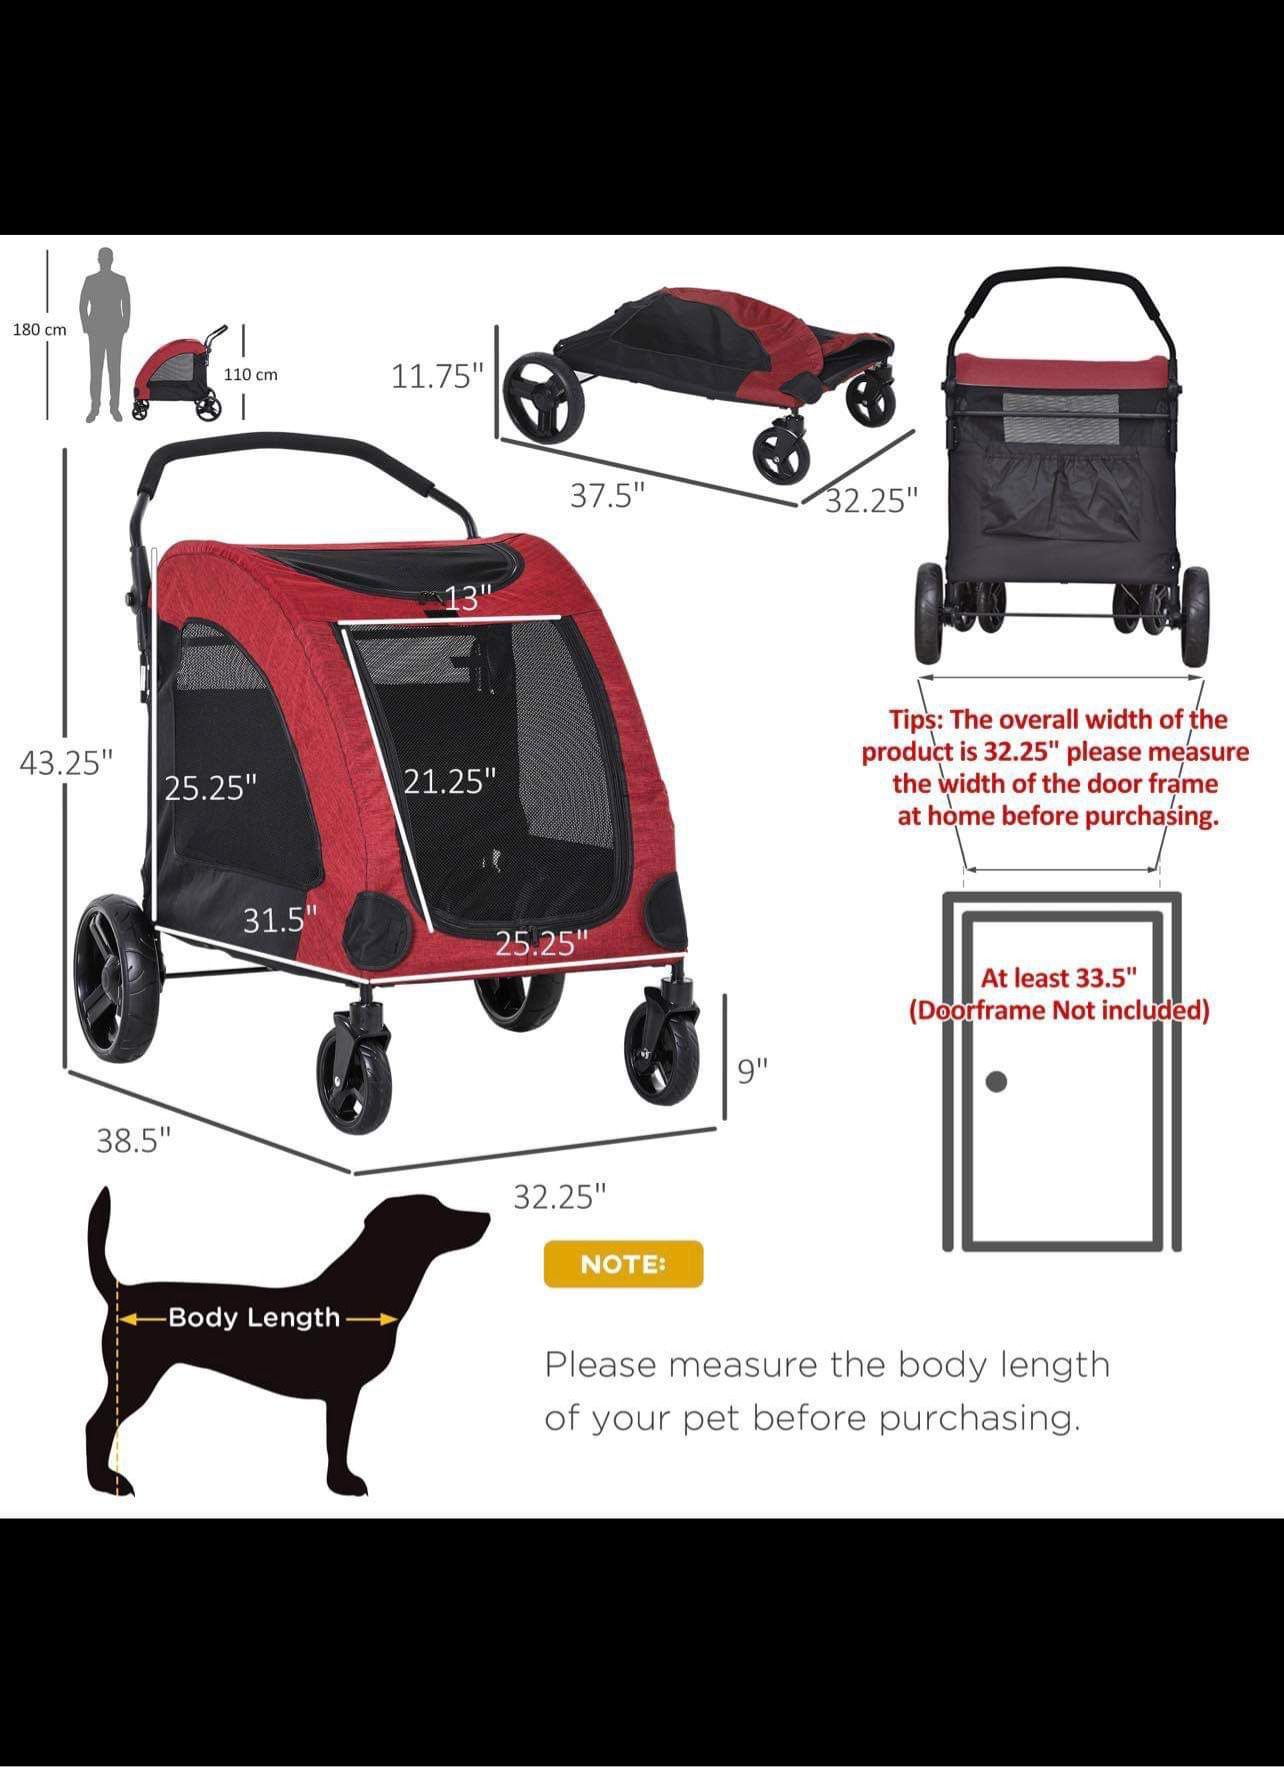 Foldable Dog Stroller with Storage Pocket, Oxford Fabric for Medium Size Dogs - Red